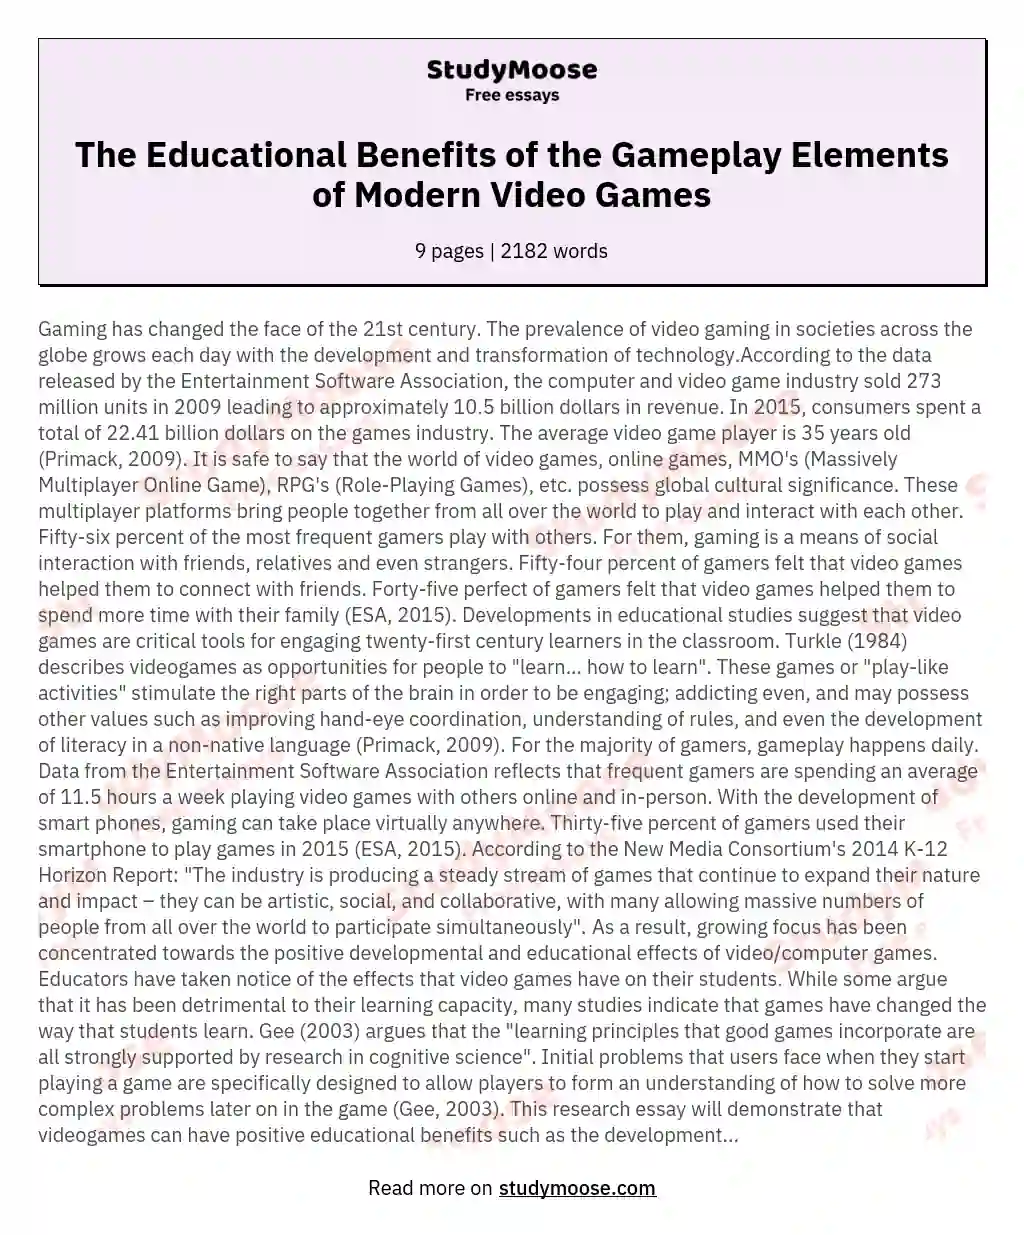 The Educational Benefits of the Gameplay Elements of Modern Video Games essay